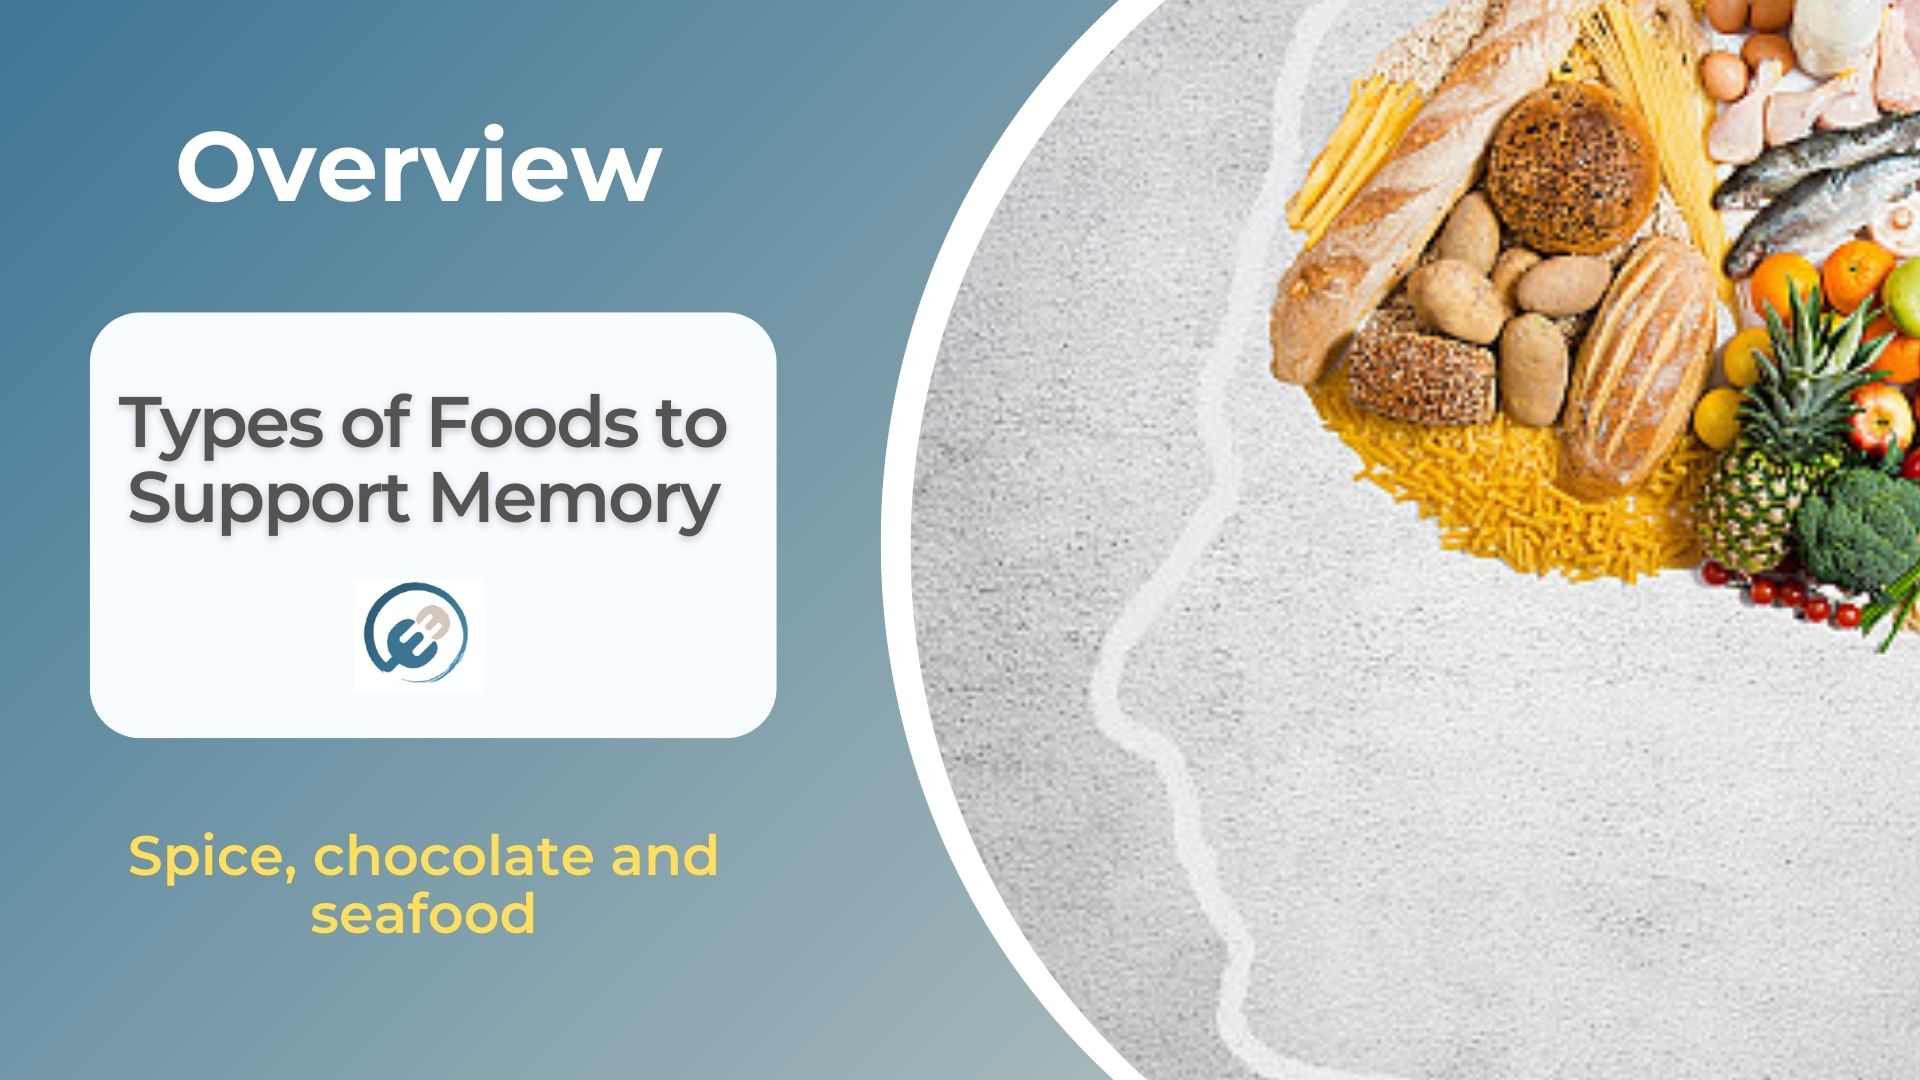 Types of Foods to Support Memory